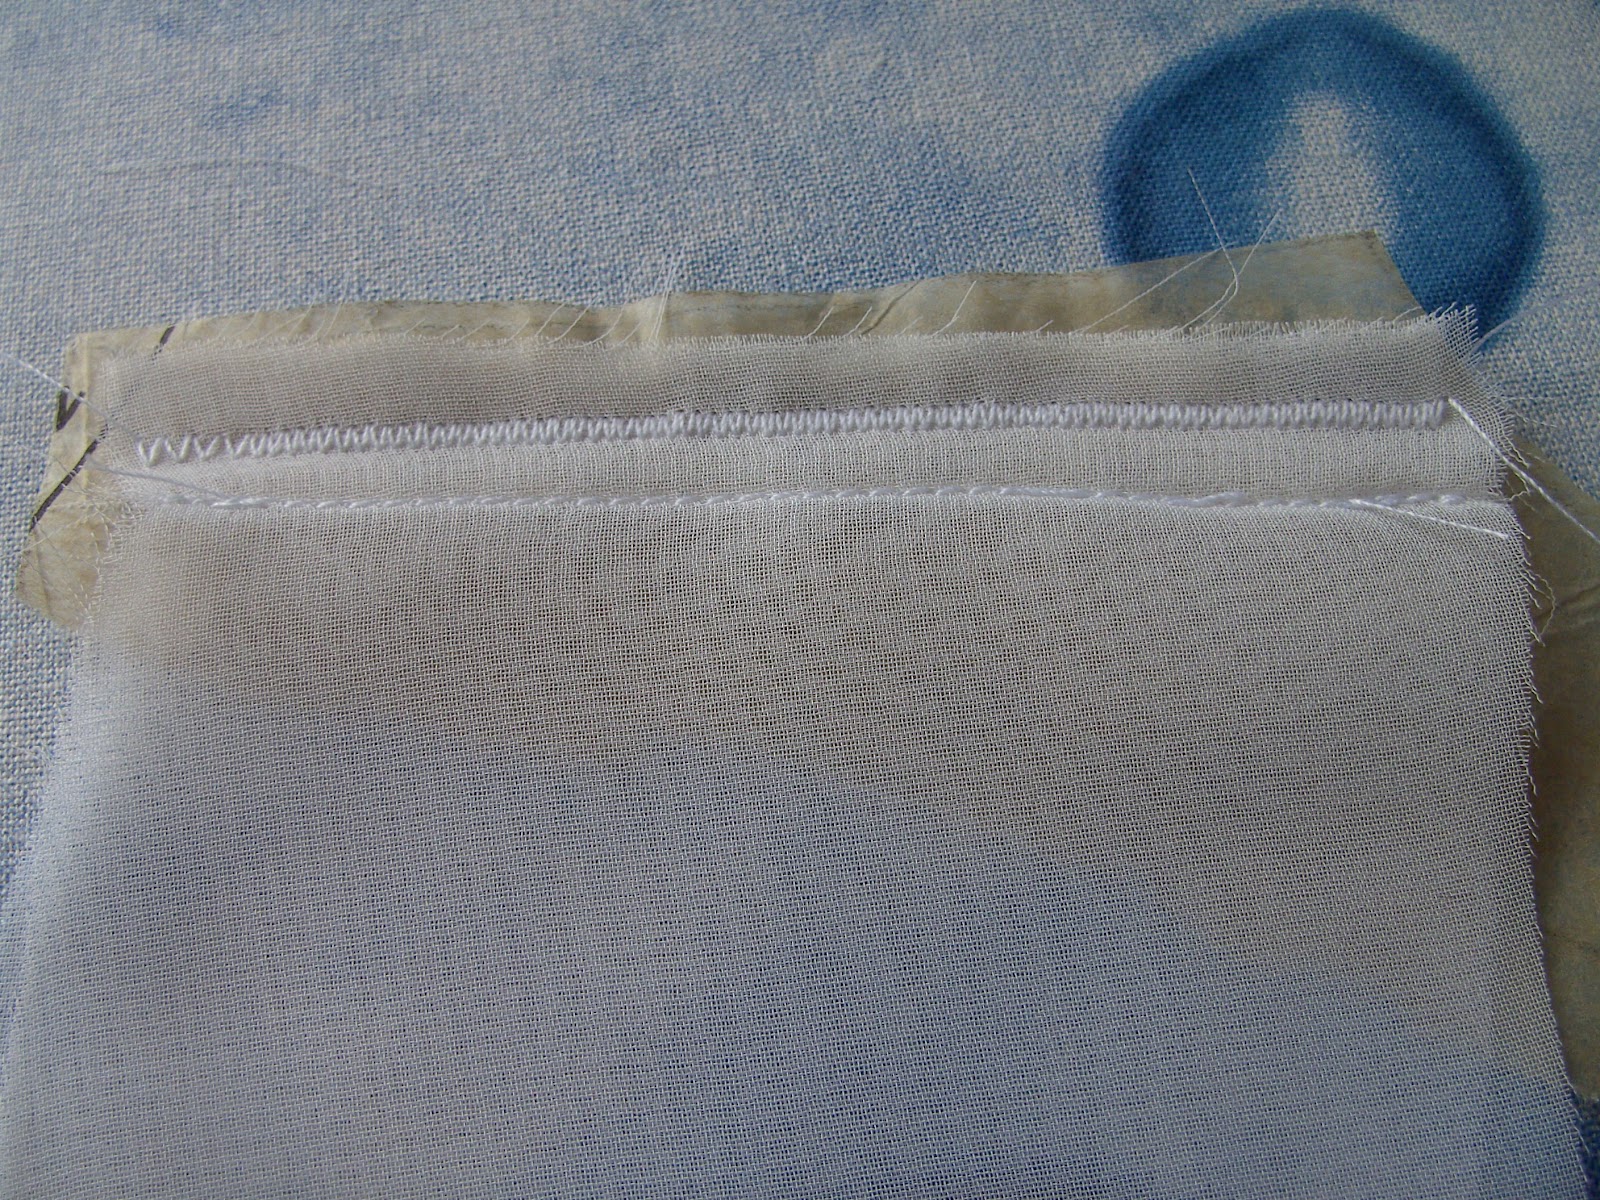 How to Sew with Sheer Fabric 